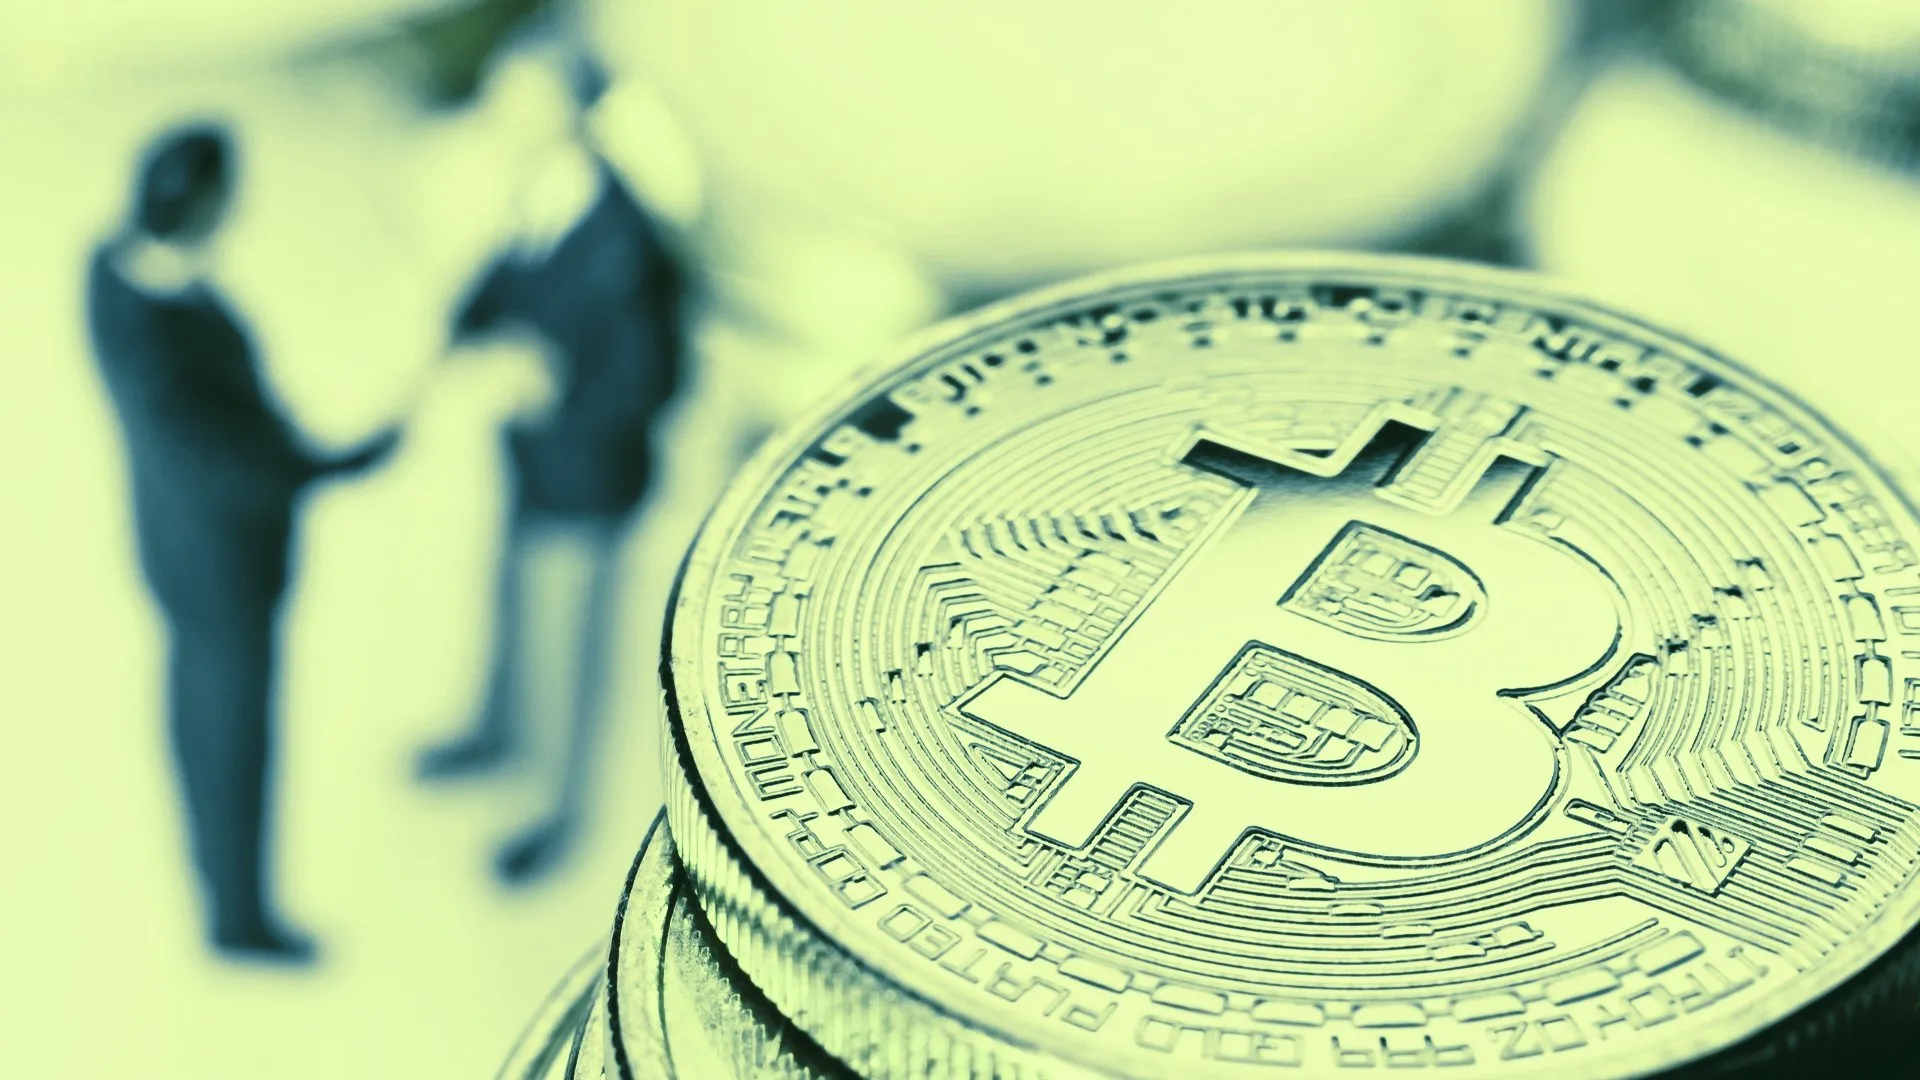 Institutional investment in Bitcoin appears to be on the rise (Image: Shutterstock)